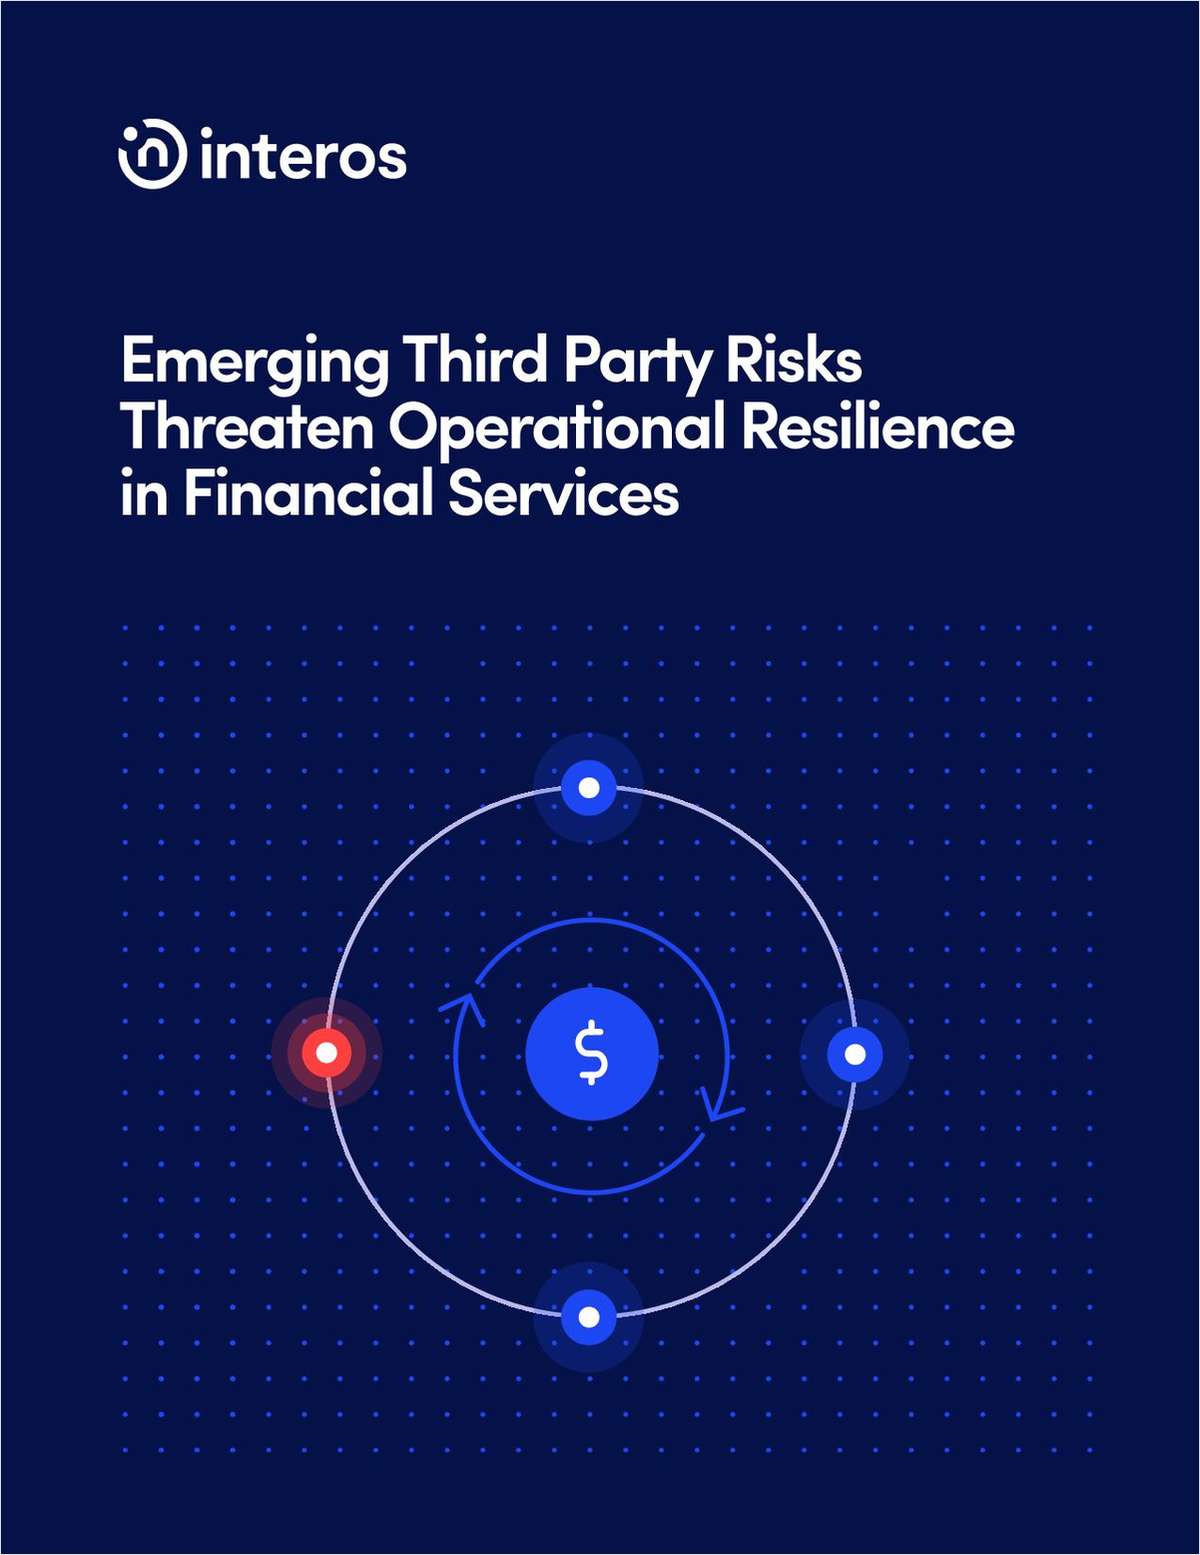 Emerging Third Party Risks Threaten Operational Resilience in Financial Services